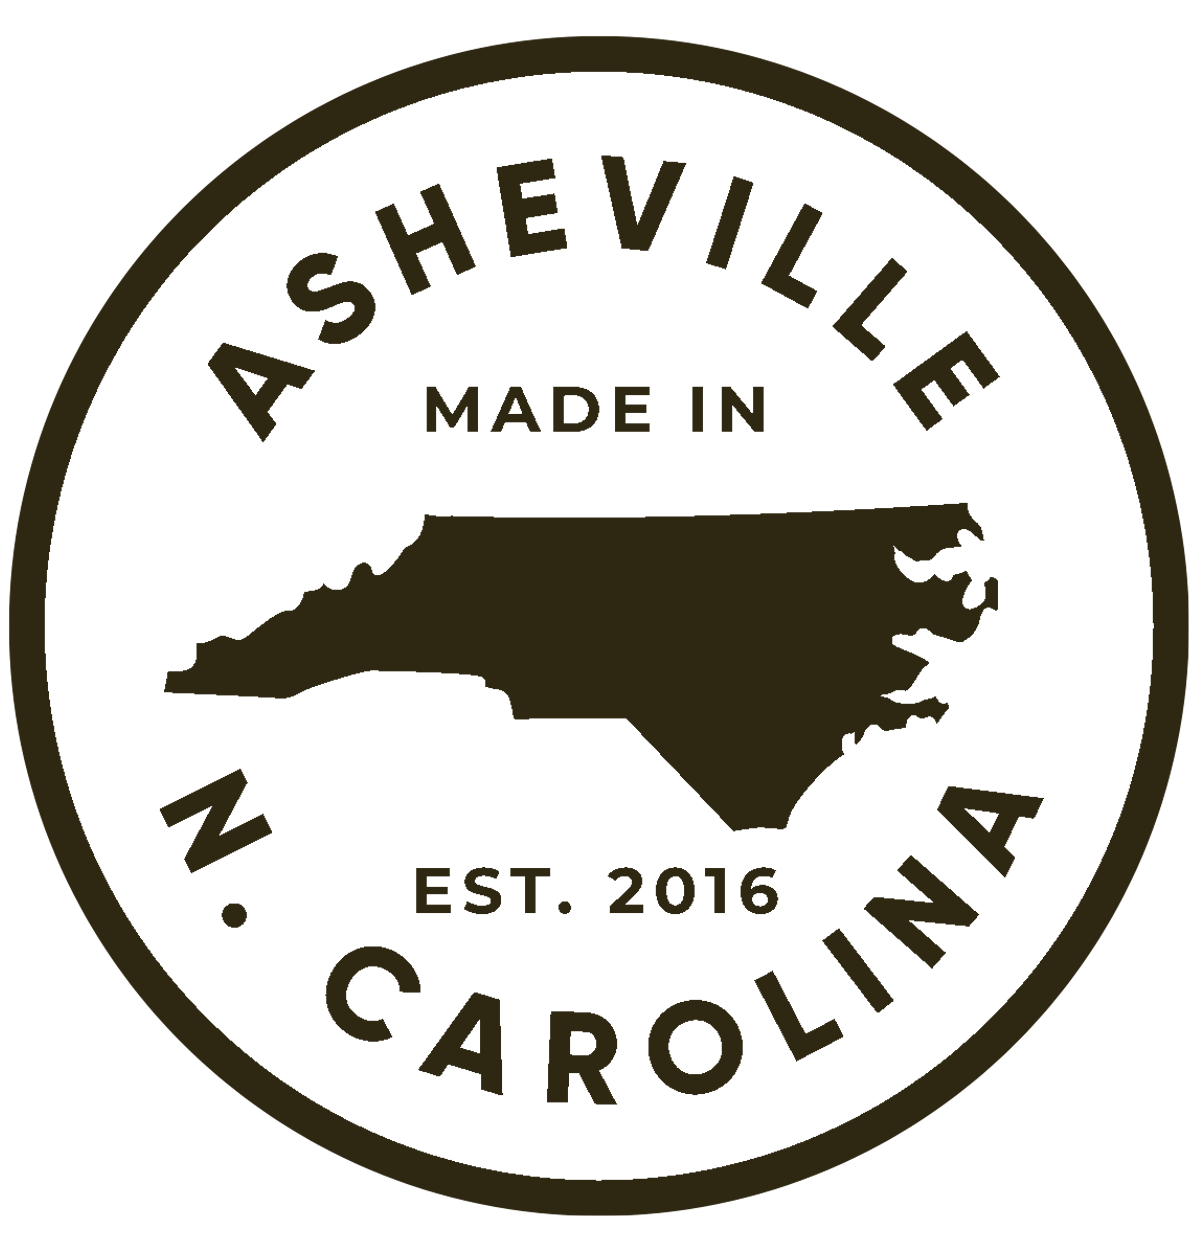 made in asheville